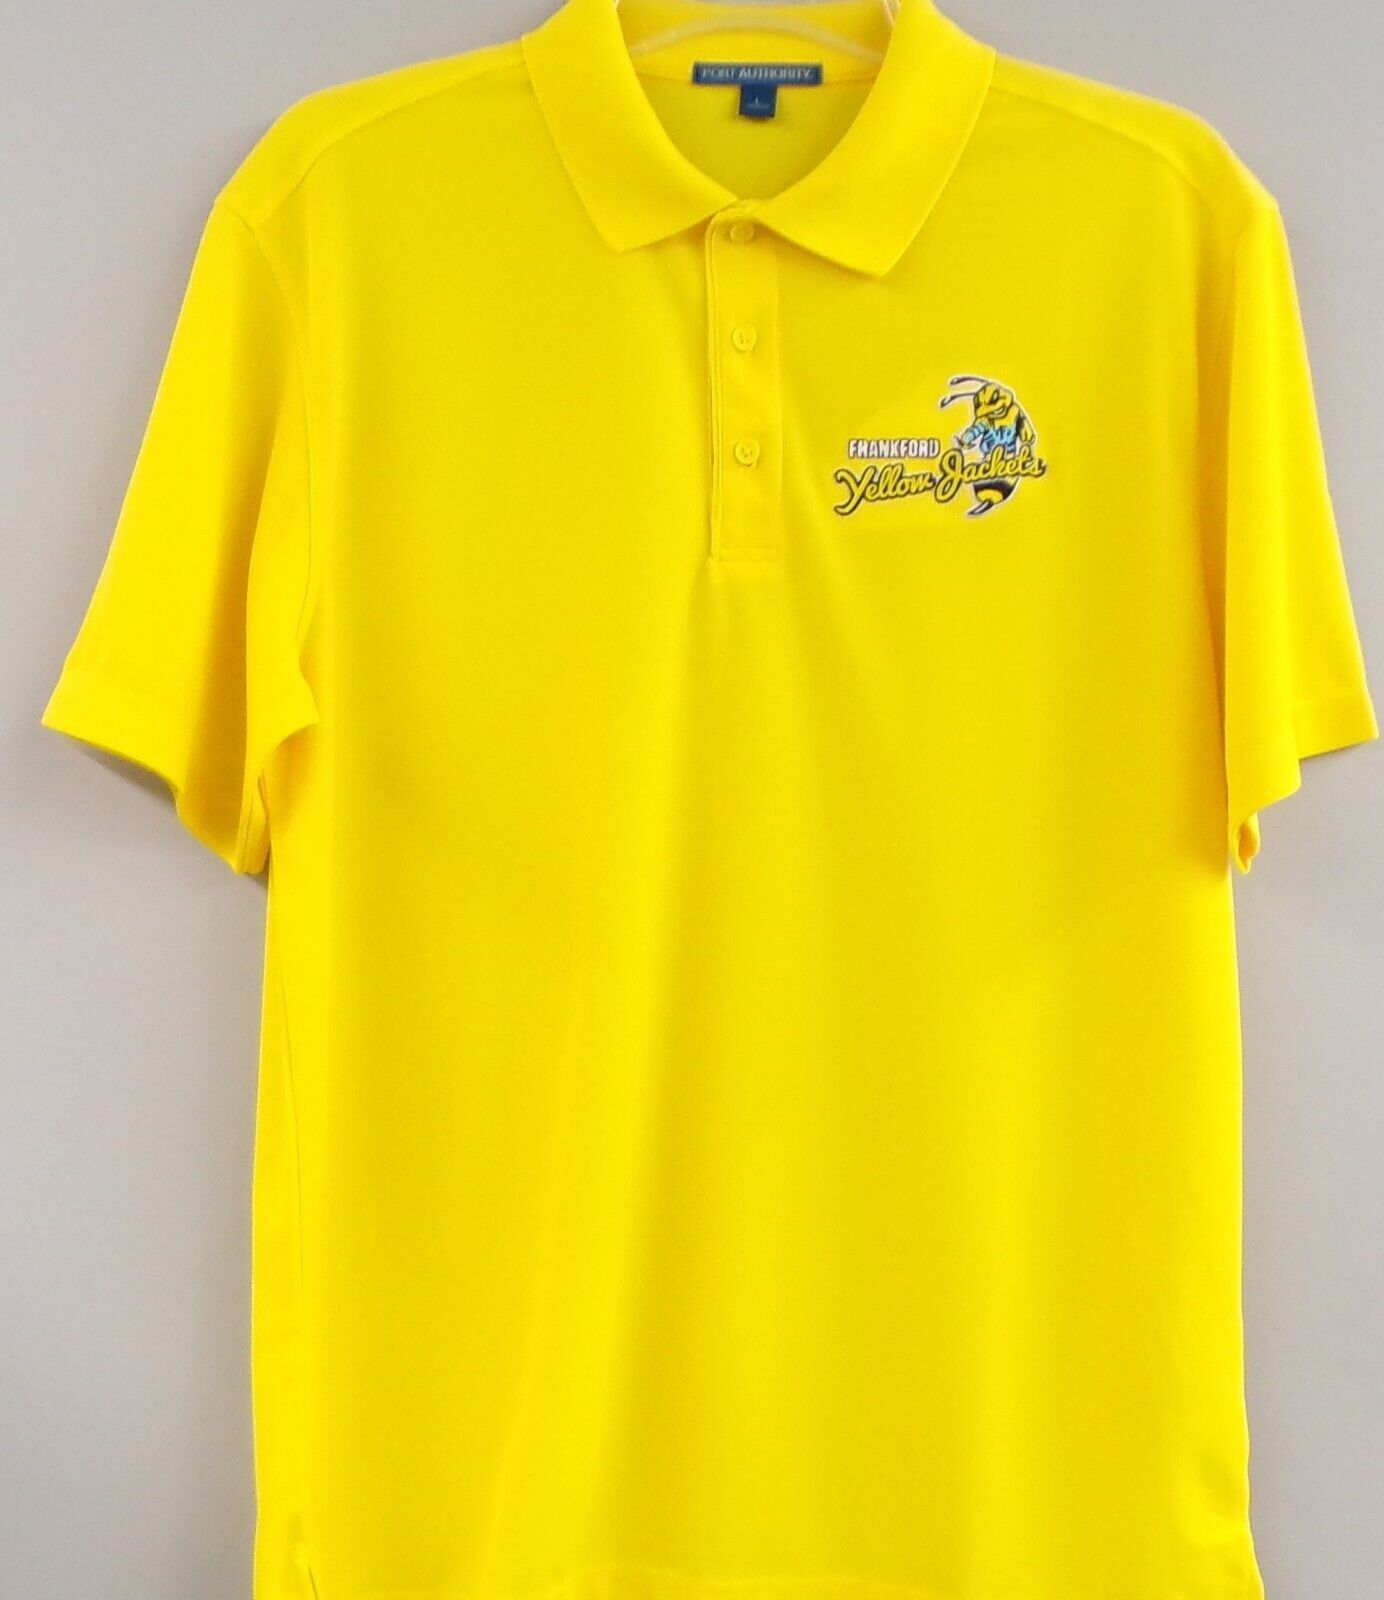 NFL 100 Years Frankford Yellow Jackets Mens Polo XS-6XL, LT-4XLT Phil. Eagles  - $25.24 - $31.13